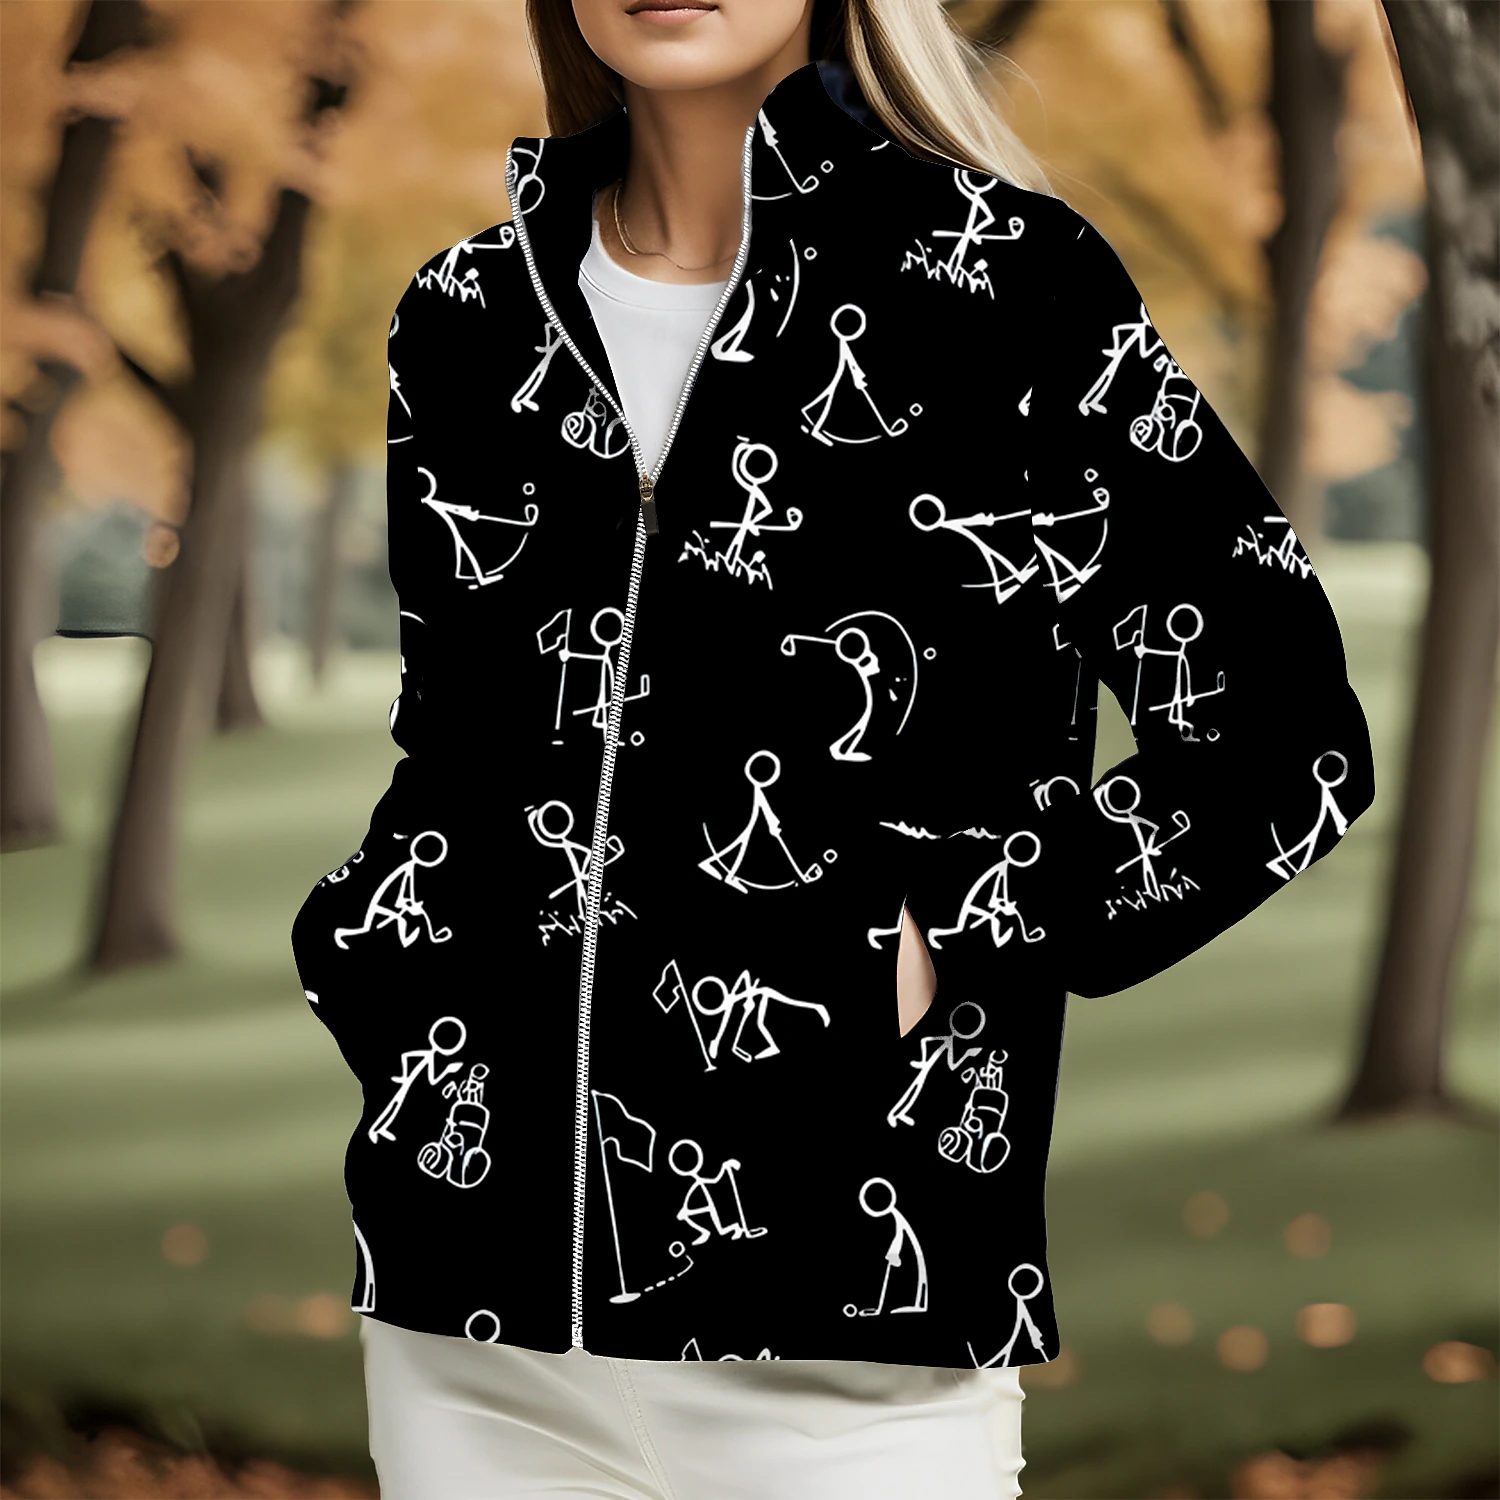 Women's Golf Hoodie Golf Pullover Golf Sweatshirt Thermal Warm Breathable Moisture Wicking Long Sleeve Golf Outerwear Top Regular Fit Side Pockets Full Zip Funny Printed Spring Autumn Tennis Golf 2023 - € 27.99 –P5